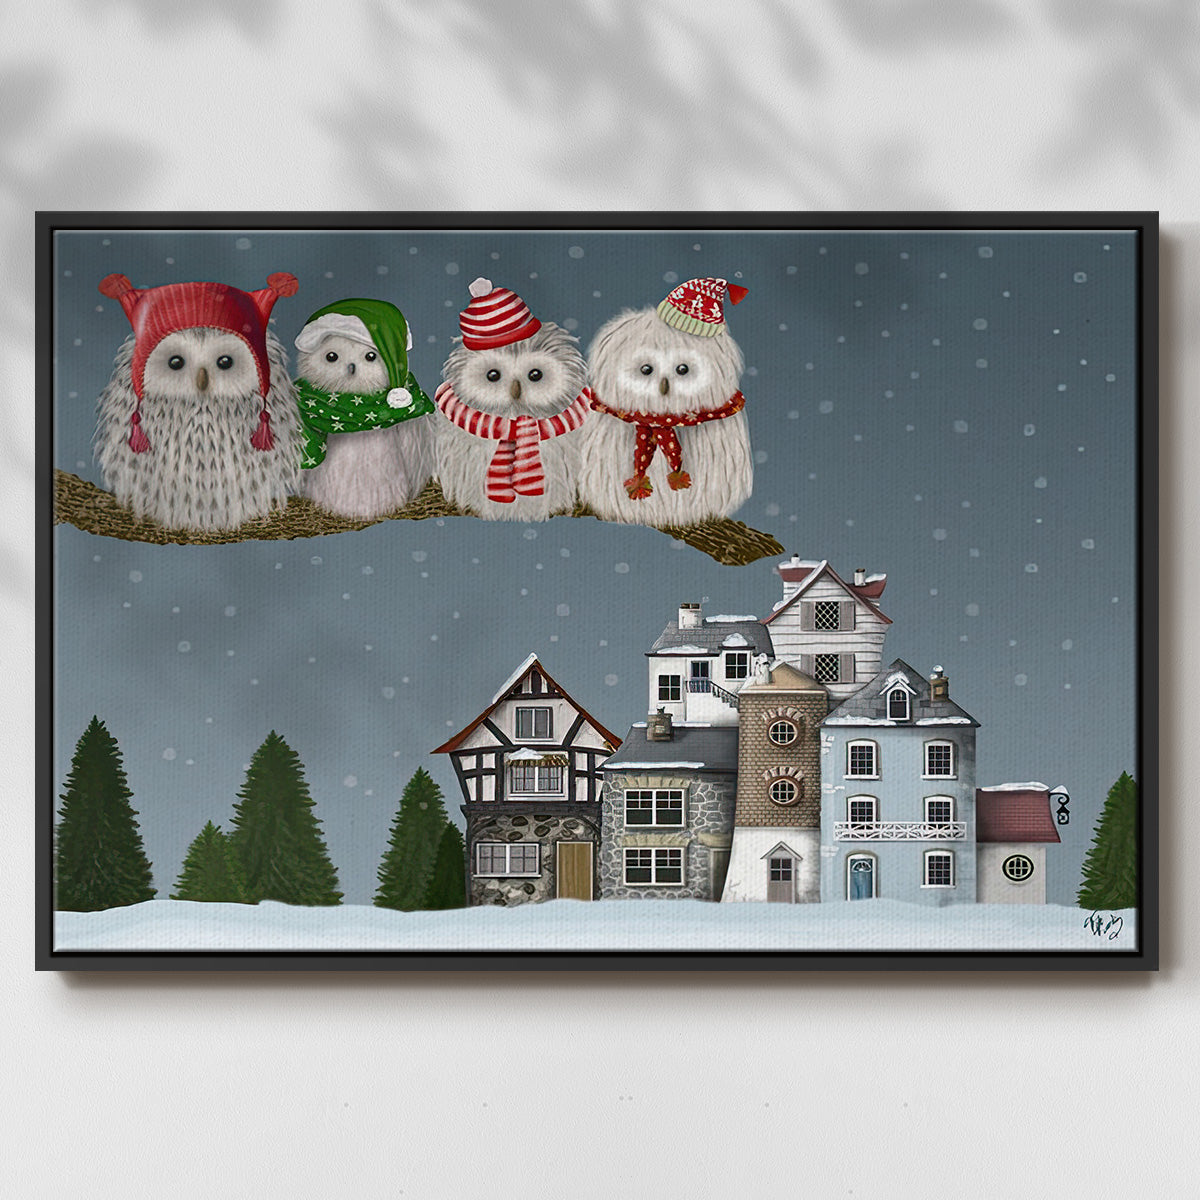 Christmas Christmas Owl Village - Framed Gallery Wrapped Canvas in Floating Frame